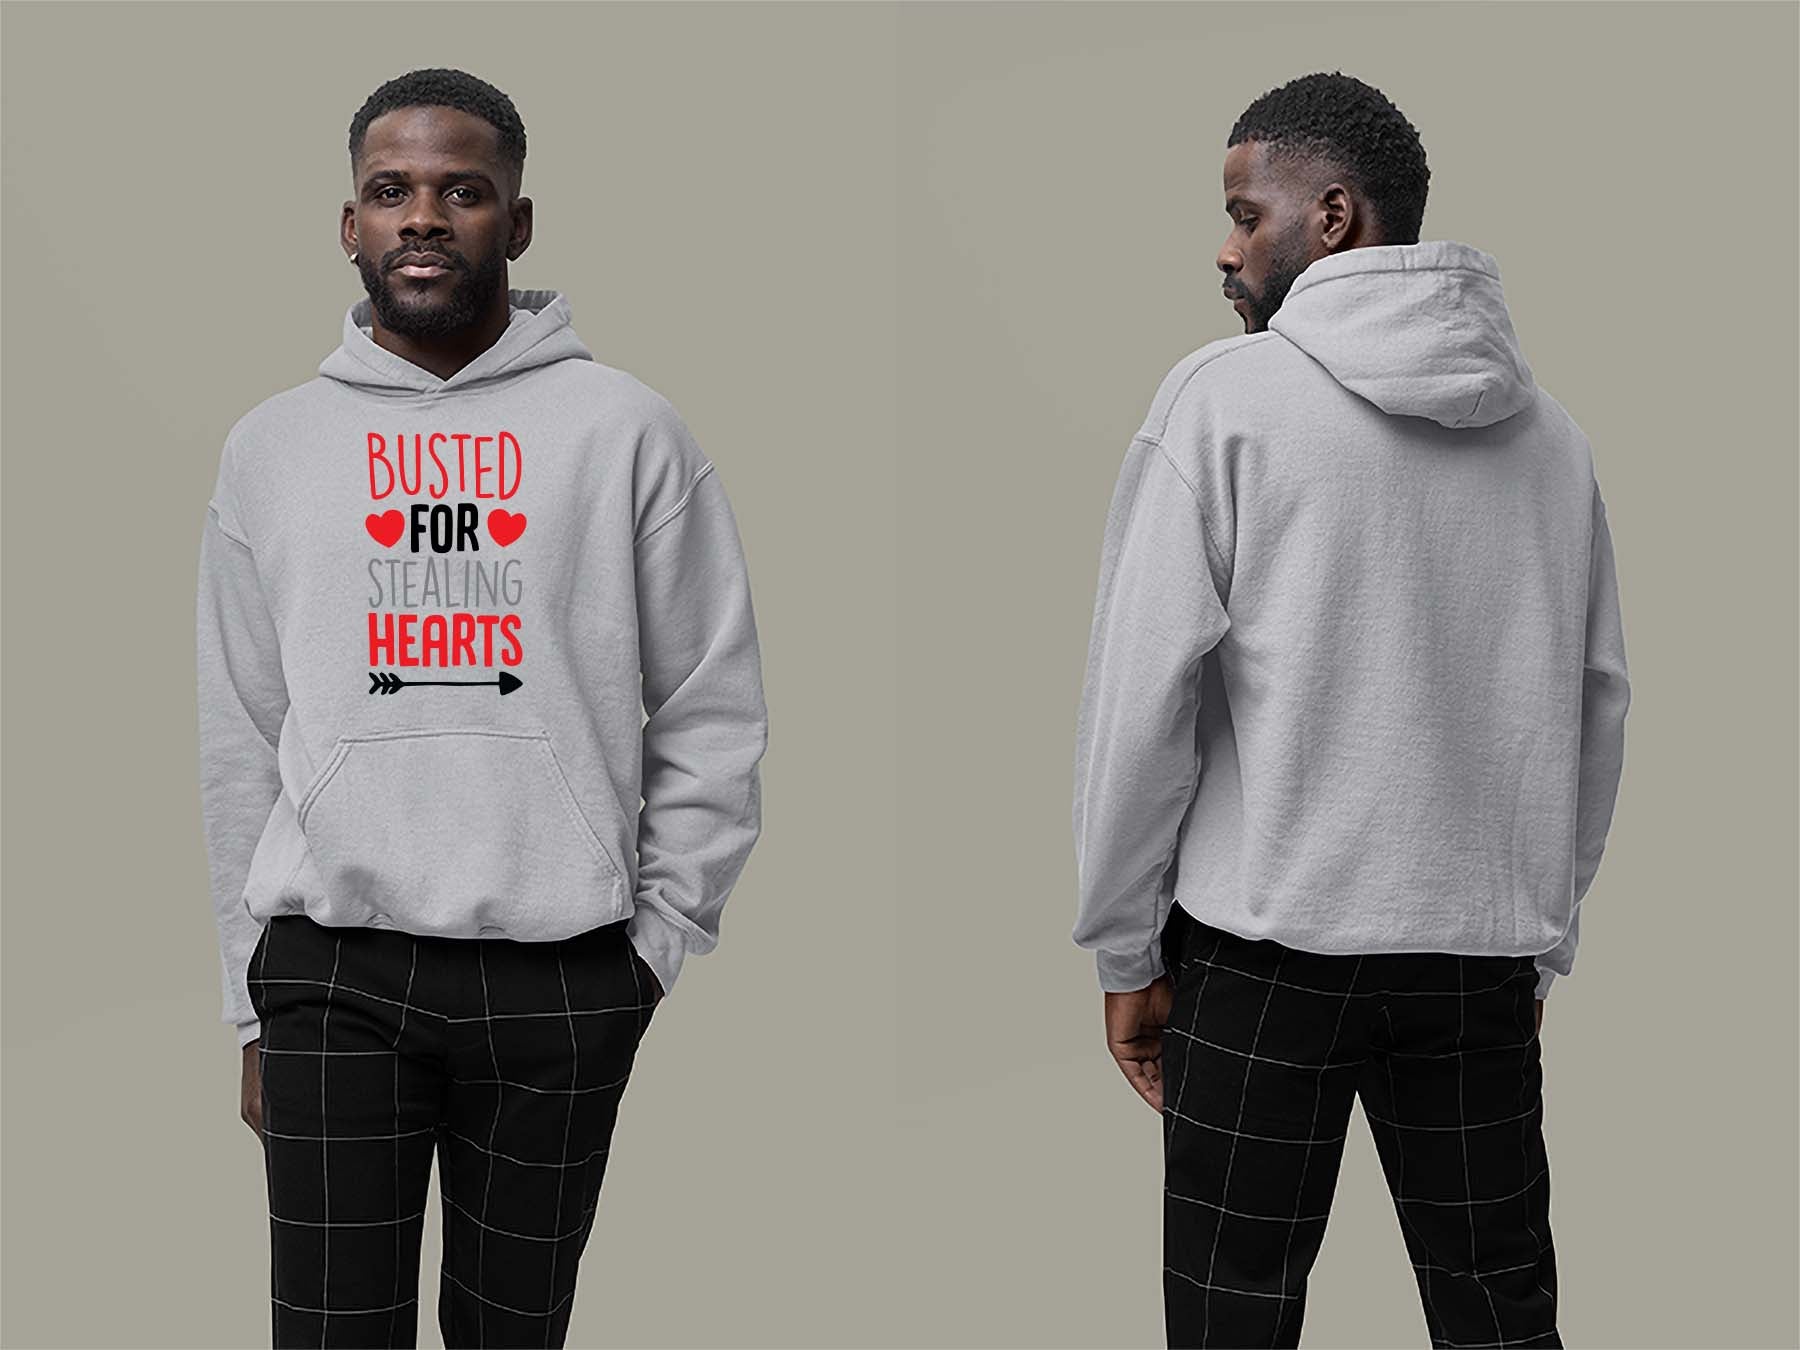 Fat Dave Busted For Stealing Hearts Hoodie Small Sport Grey